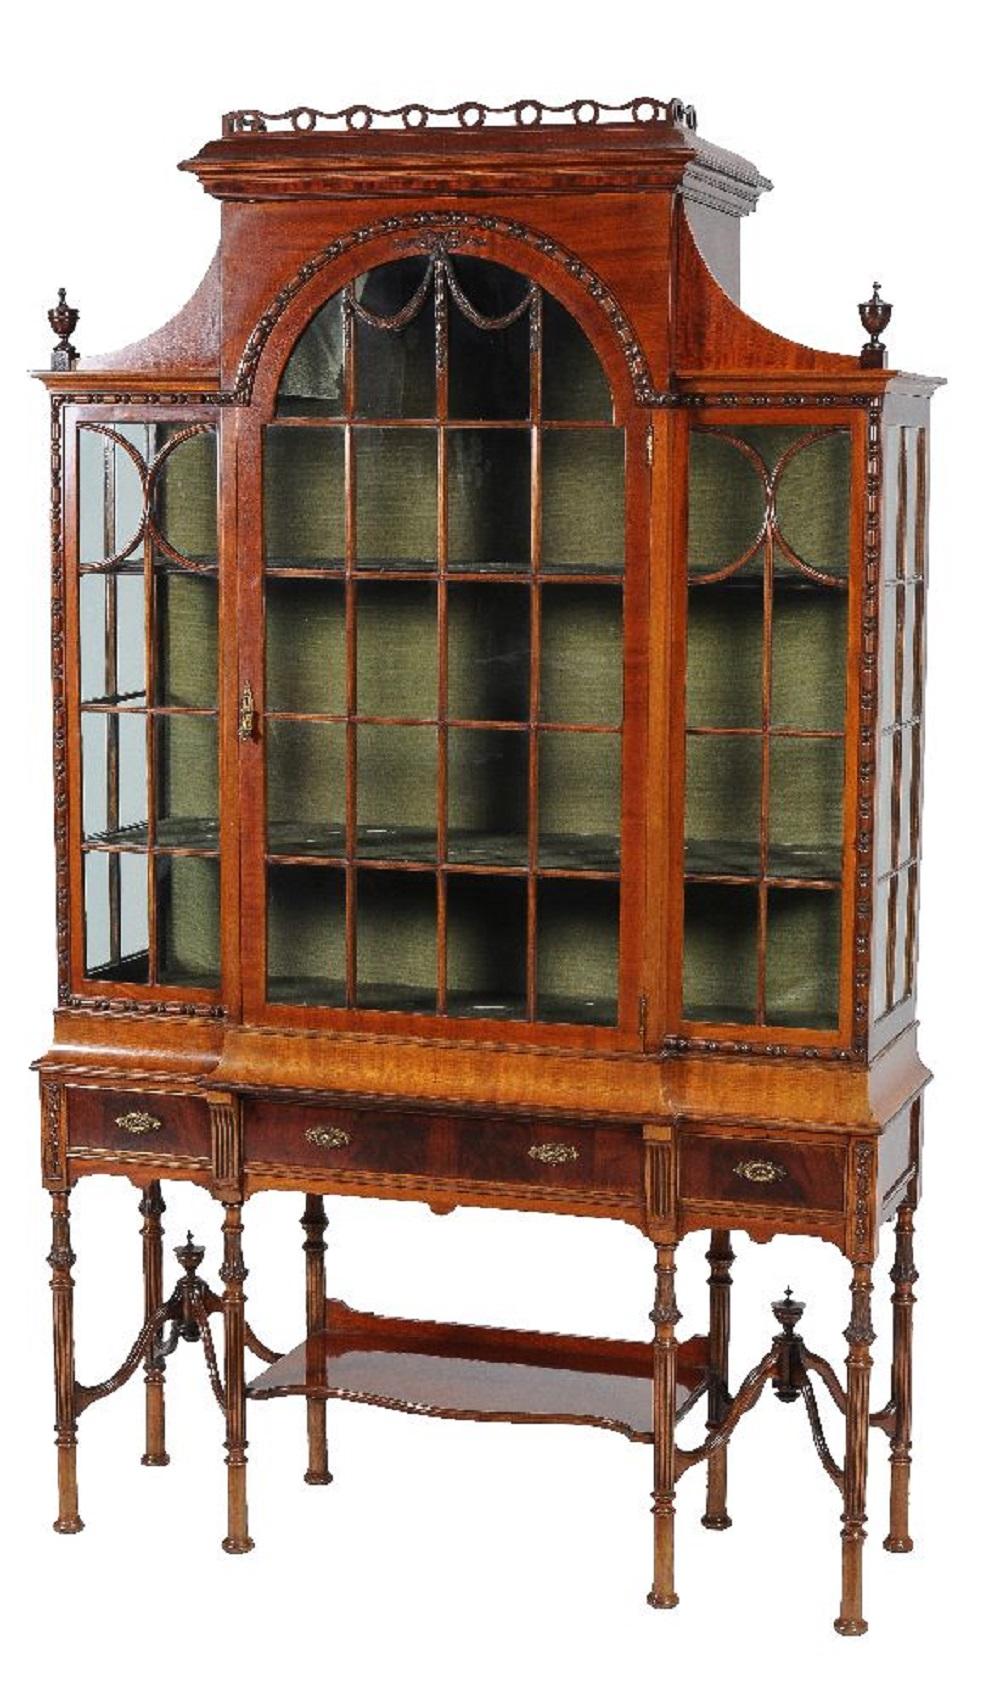 For sale is a good quality 19th century Victorian mahogany display cabinet on Stand. The cabinet has a large central arched door, above the stand. The stand has three drawers, each with brass handles. The cabinet stands on elegant legs, united by a